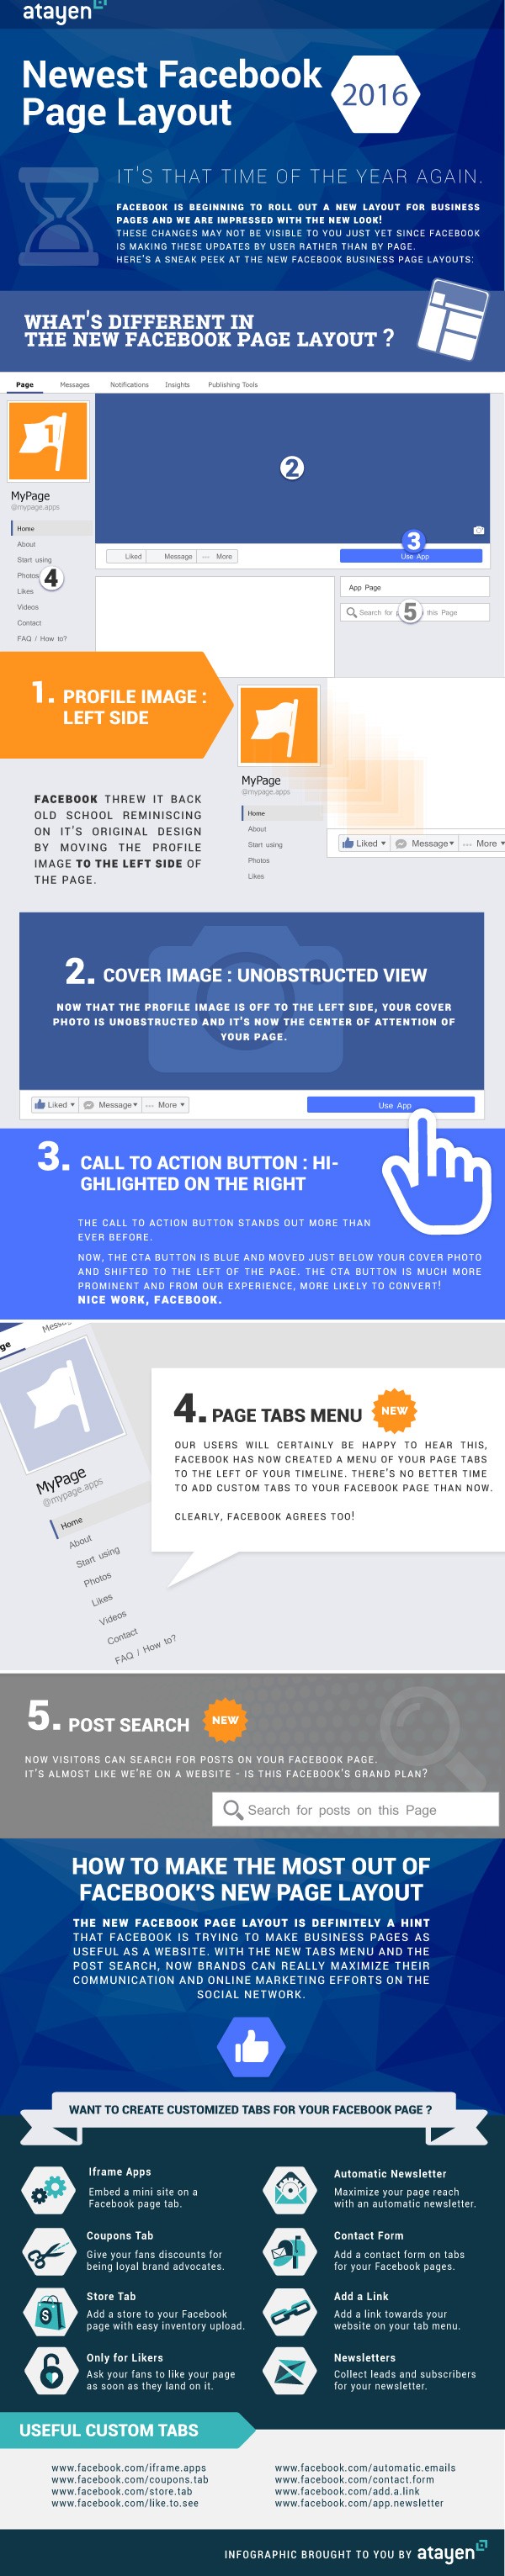 [Infographic] A Look Inside The New Facebook Page Layout - An Infographic from IFRAME APPS